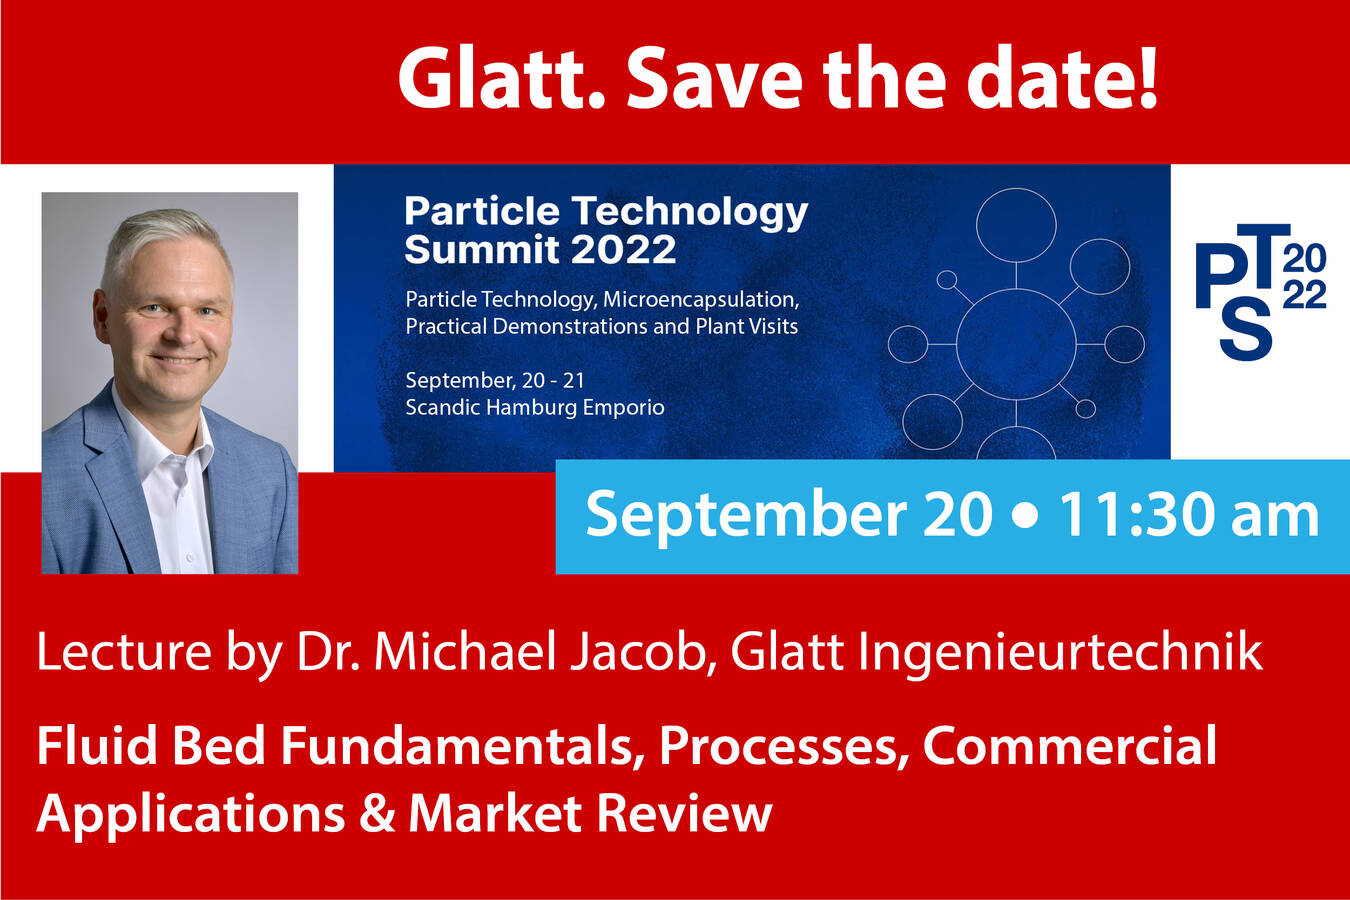 Meet Dr. Michael Jacob at the Parcticle Technology Summit 2022